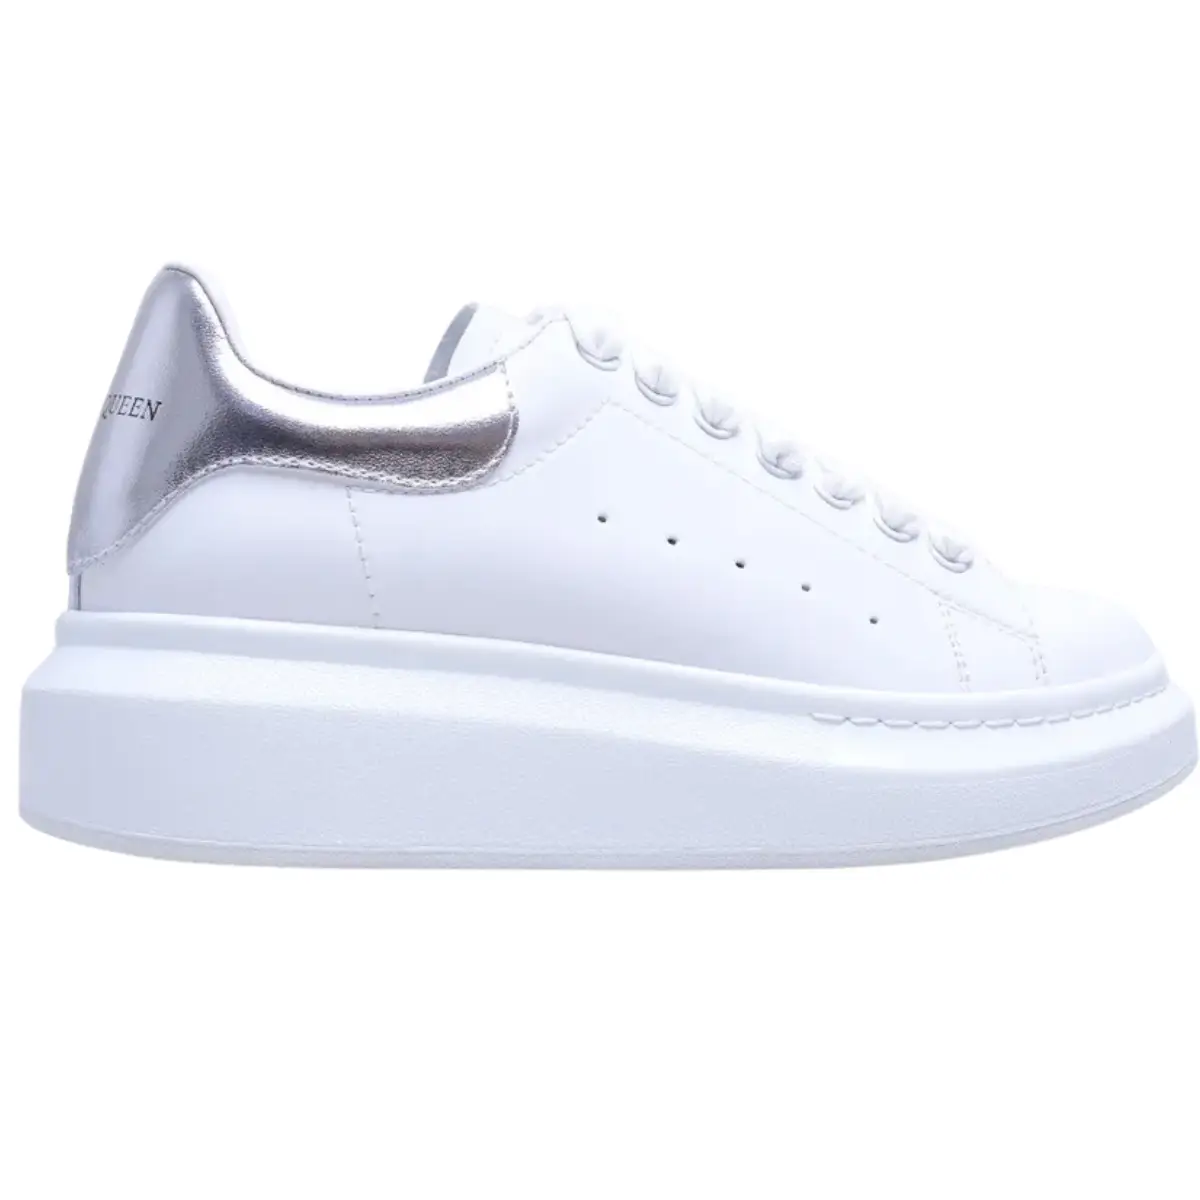 Alexander macqueen sneakers dupe dhgate a